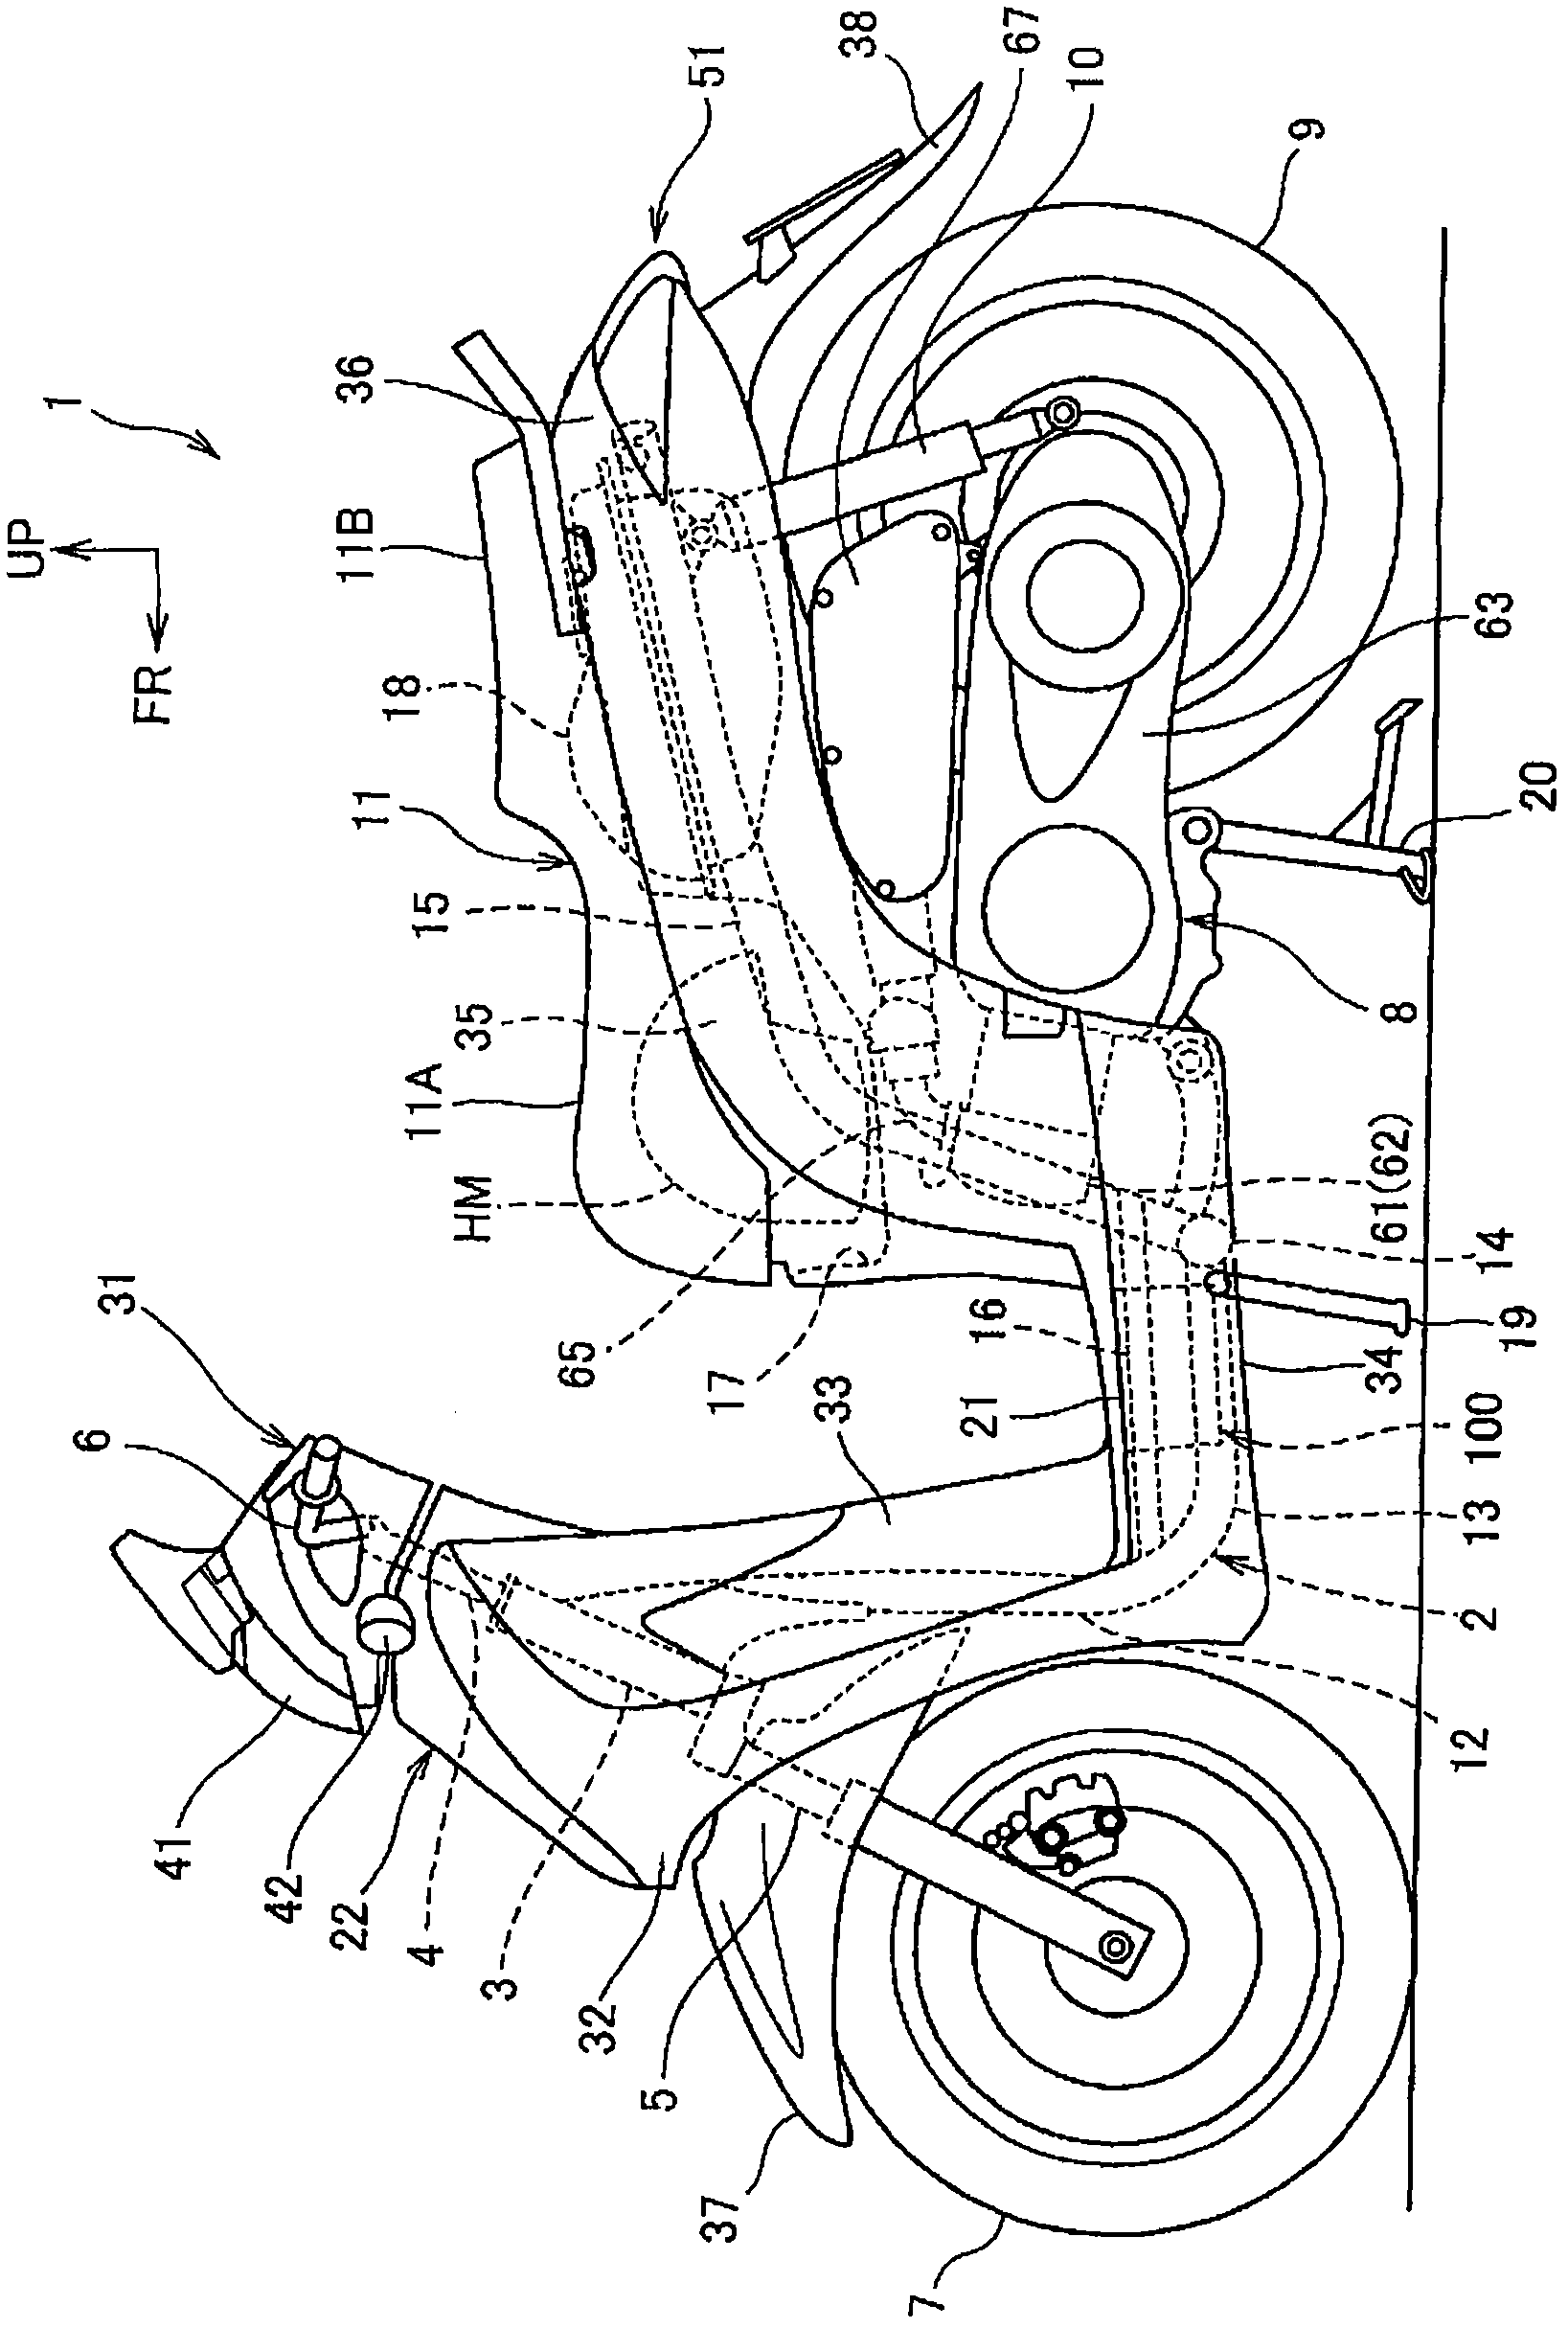 Waterproof structure of vehicle